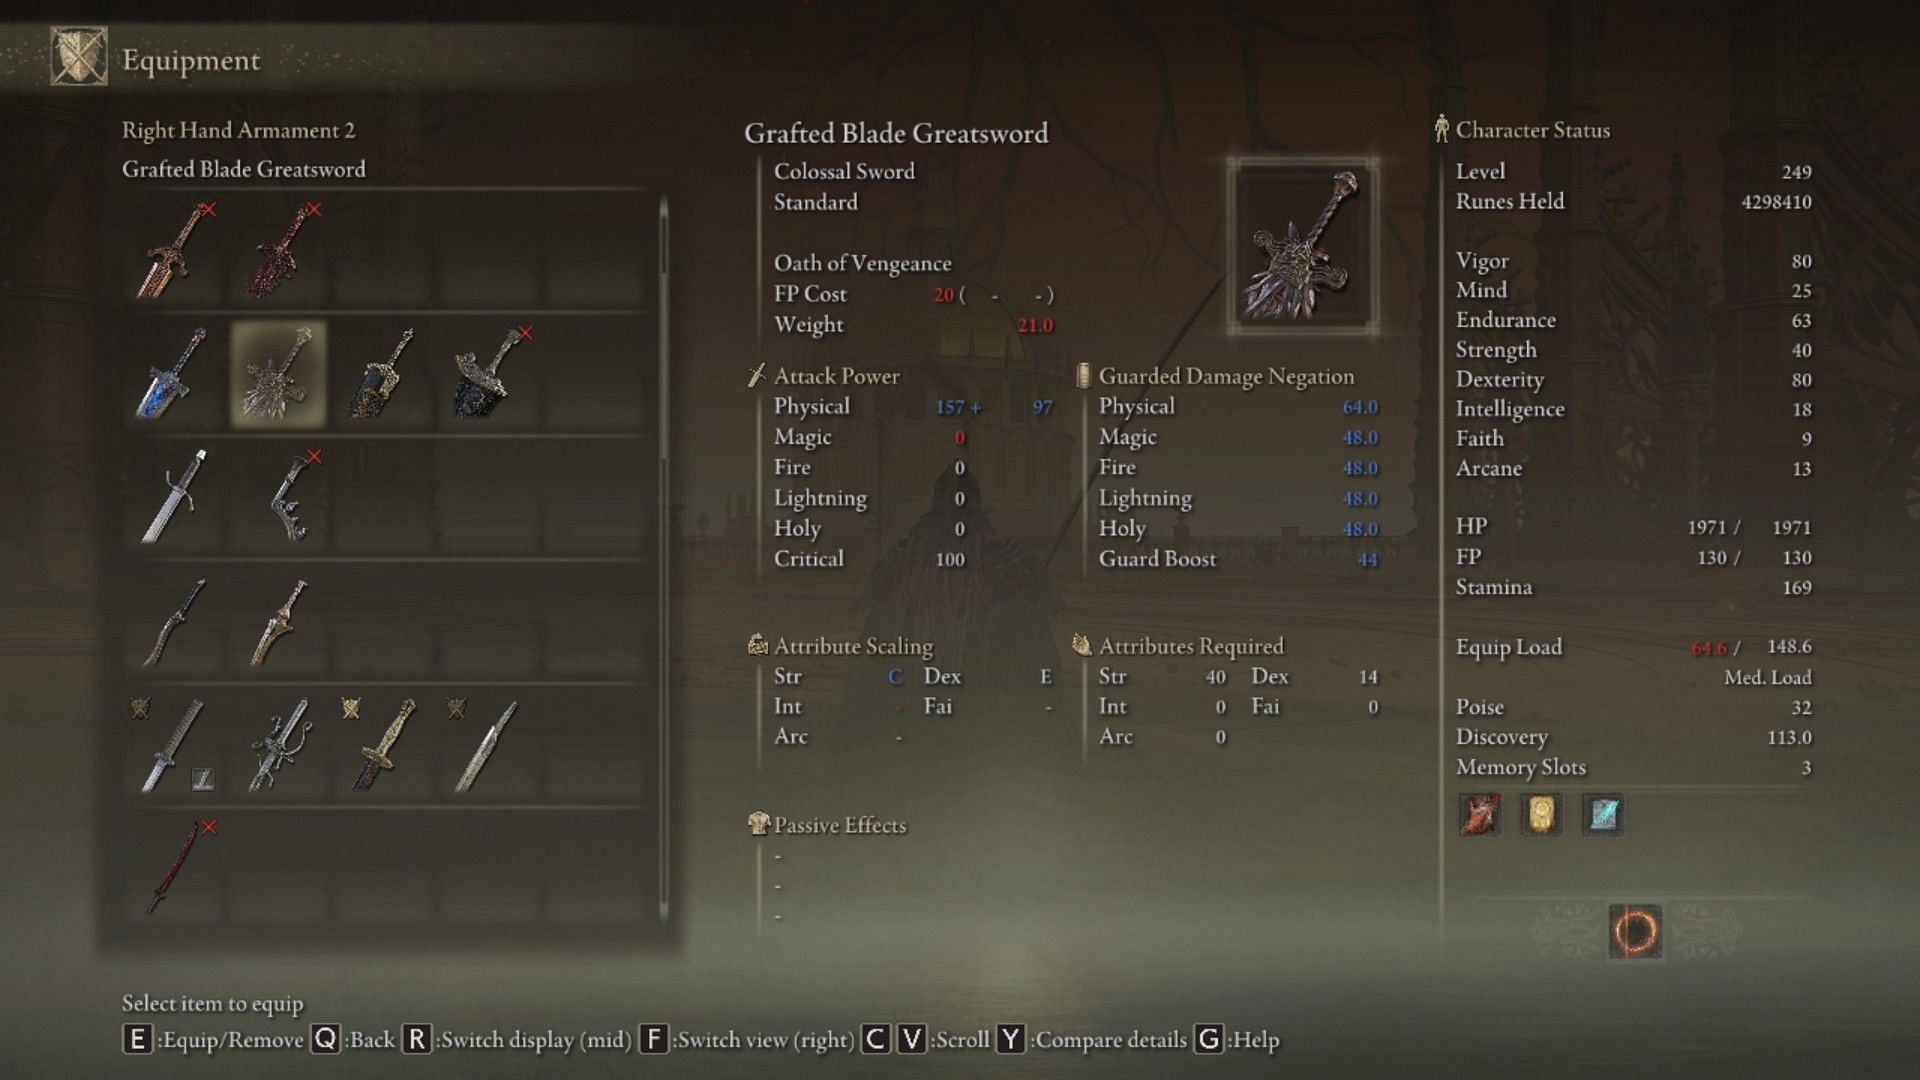 Grafted Blade Greatsword is a decent weapon, though it is not as good as others (Image via Elden Ring)